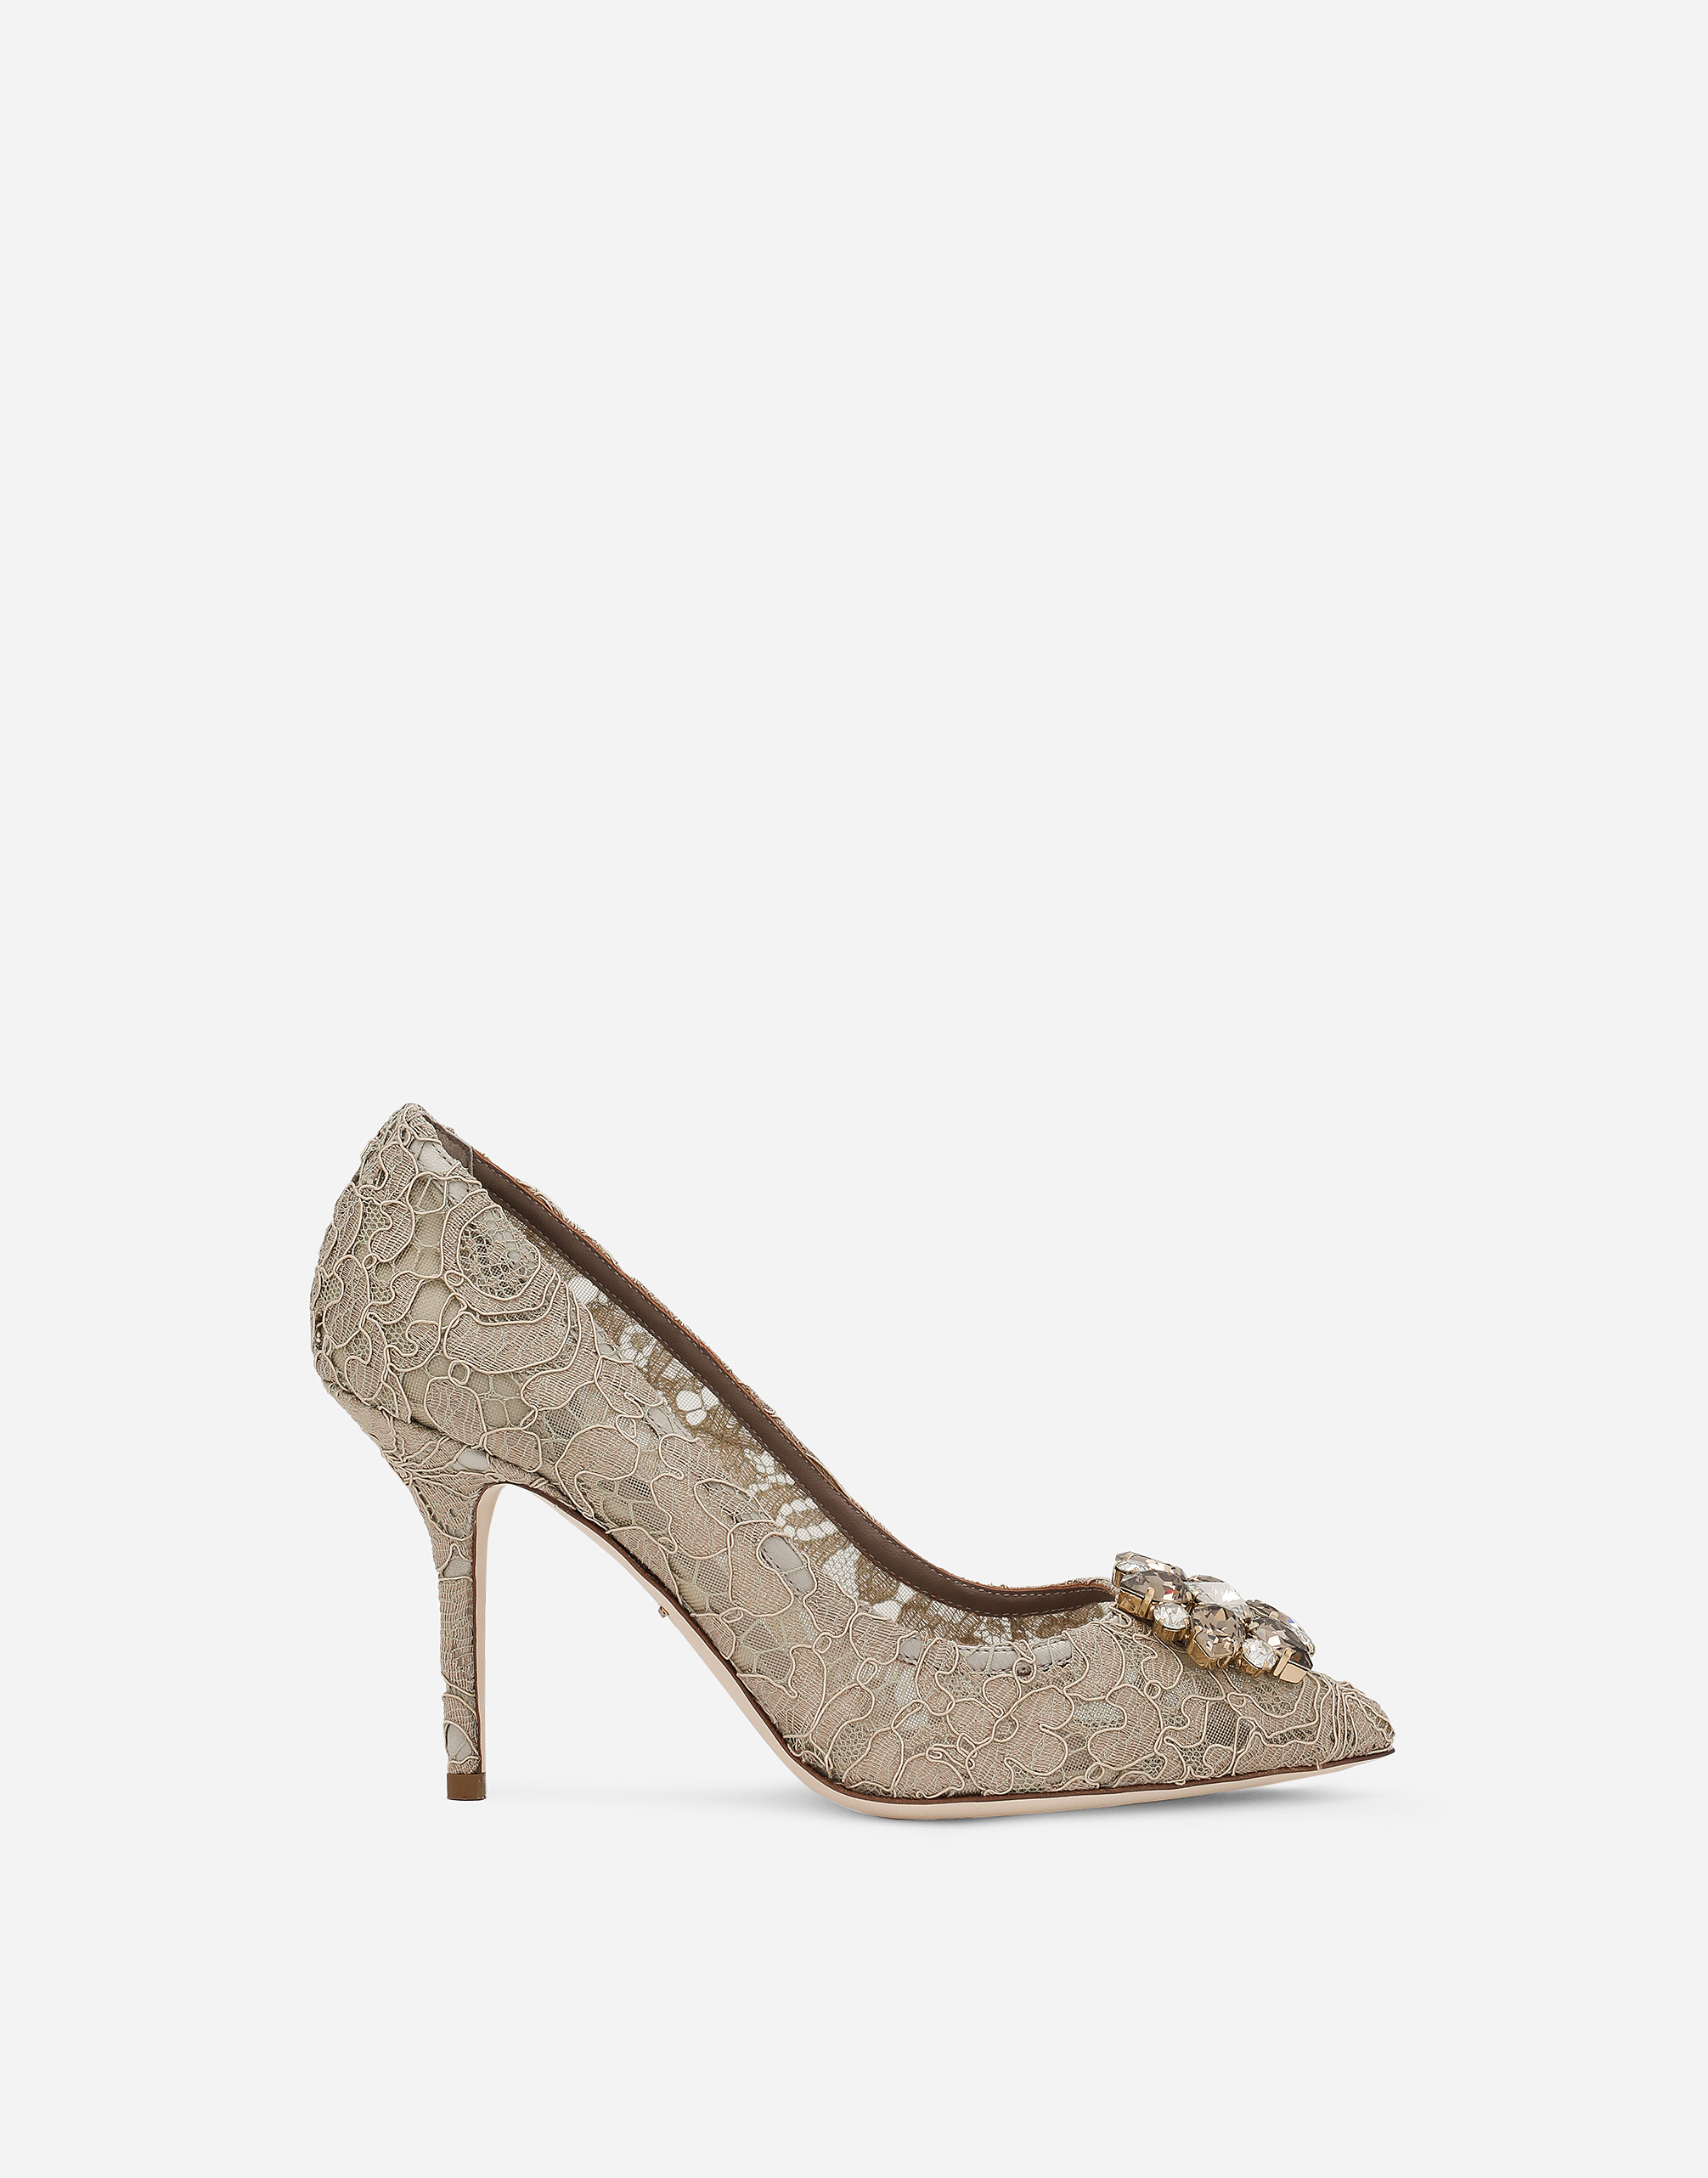 PUMP IN TAORMINA LACE WITH CRYSTALS in Beige